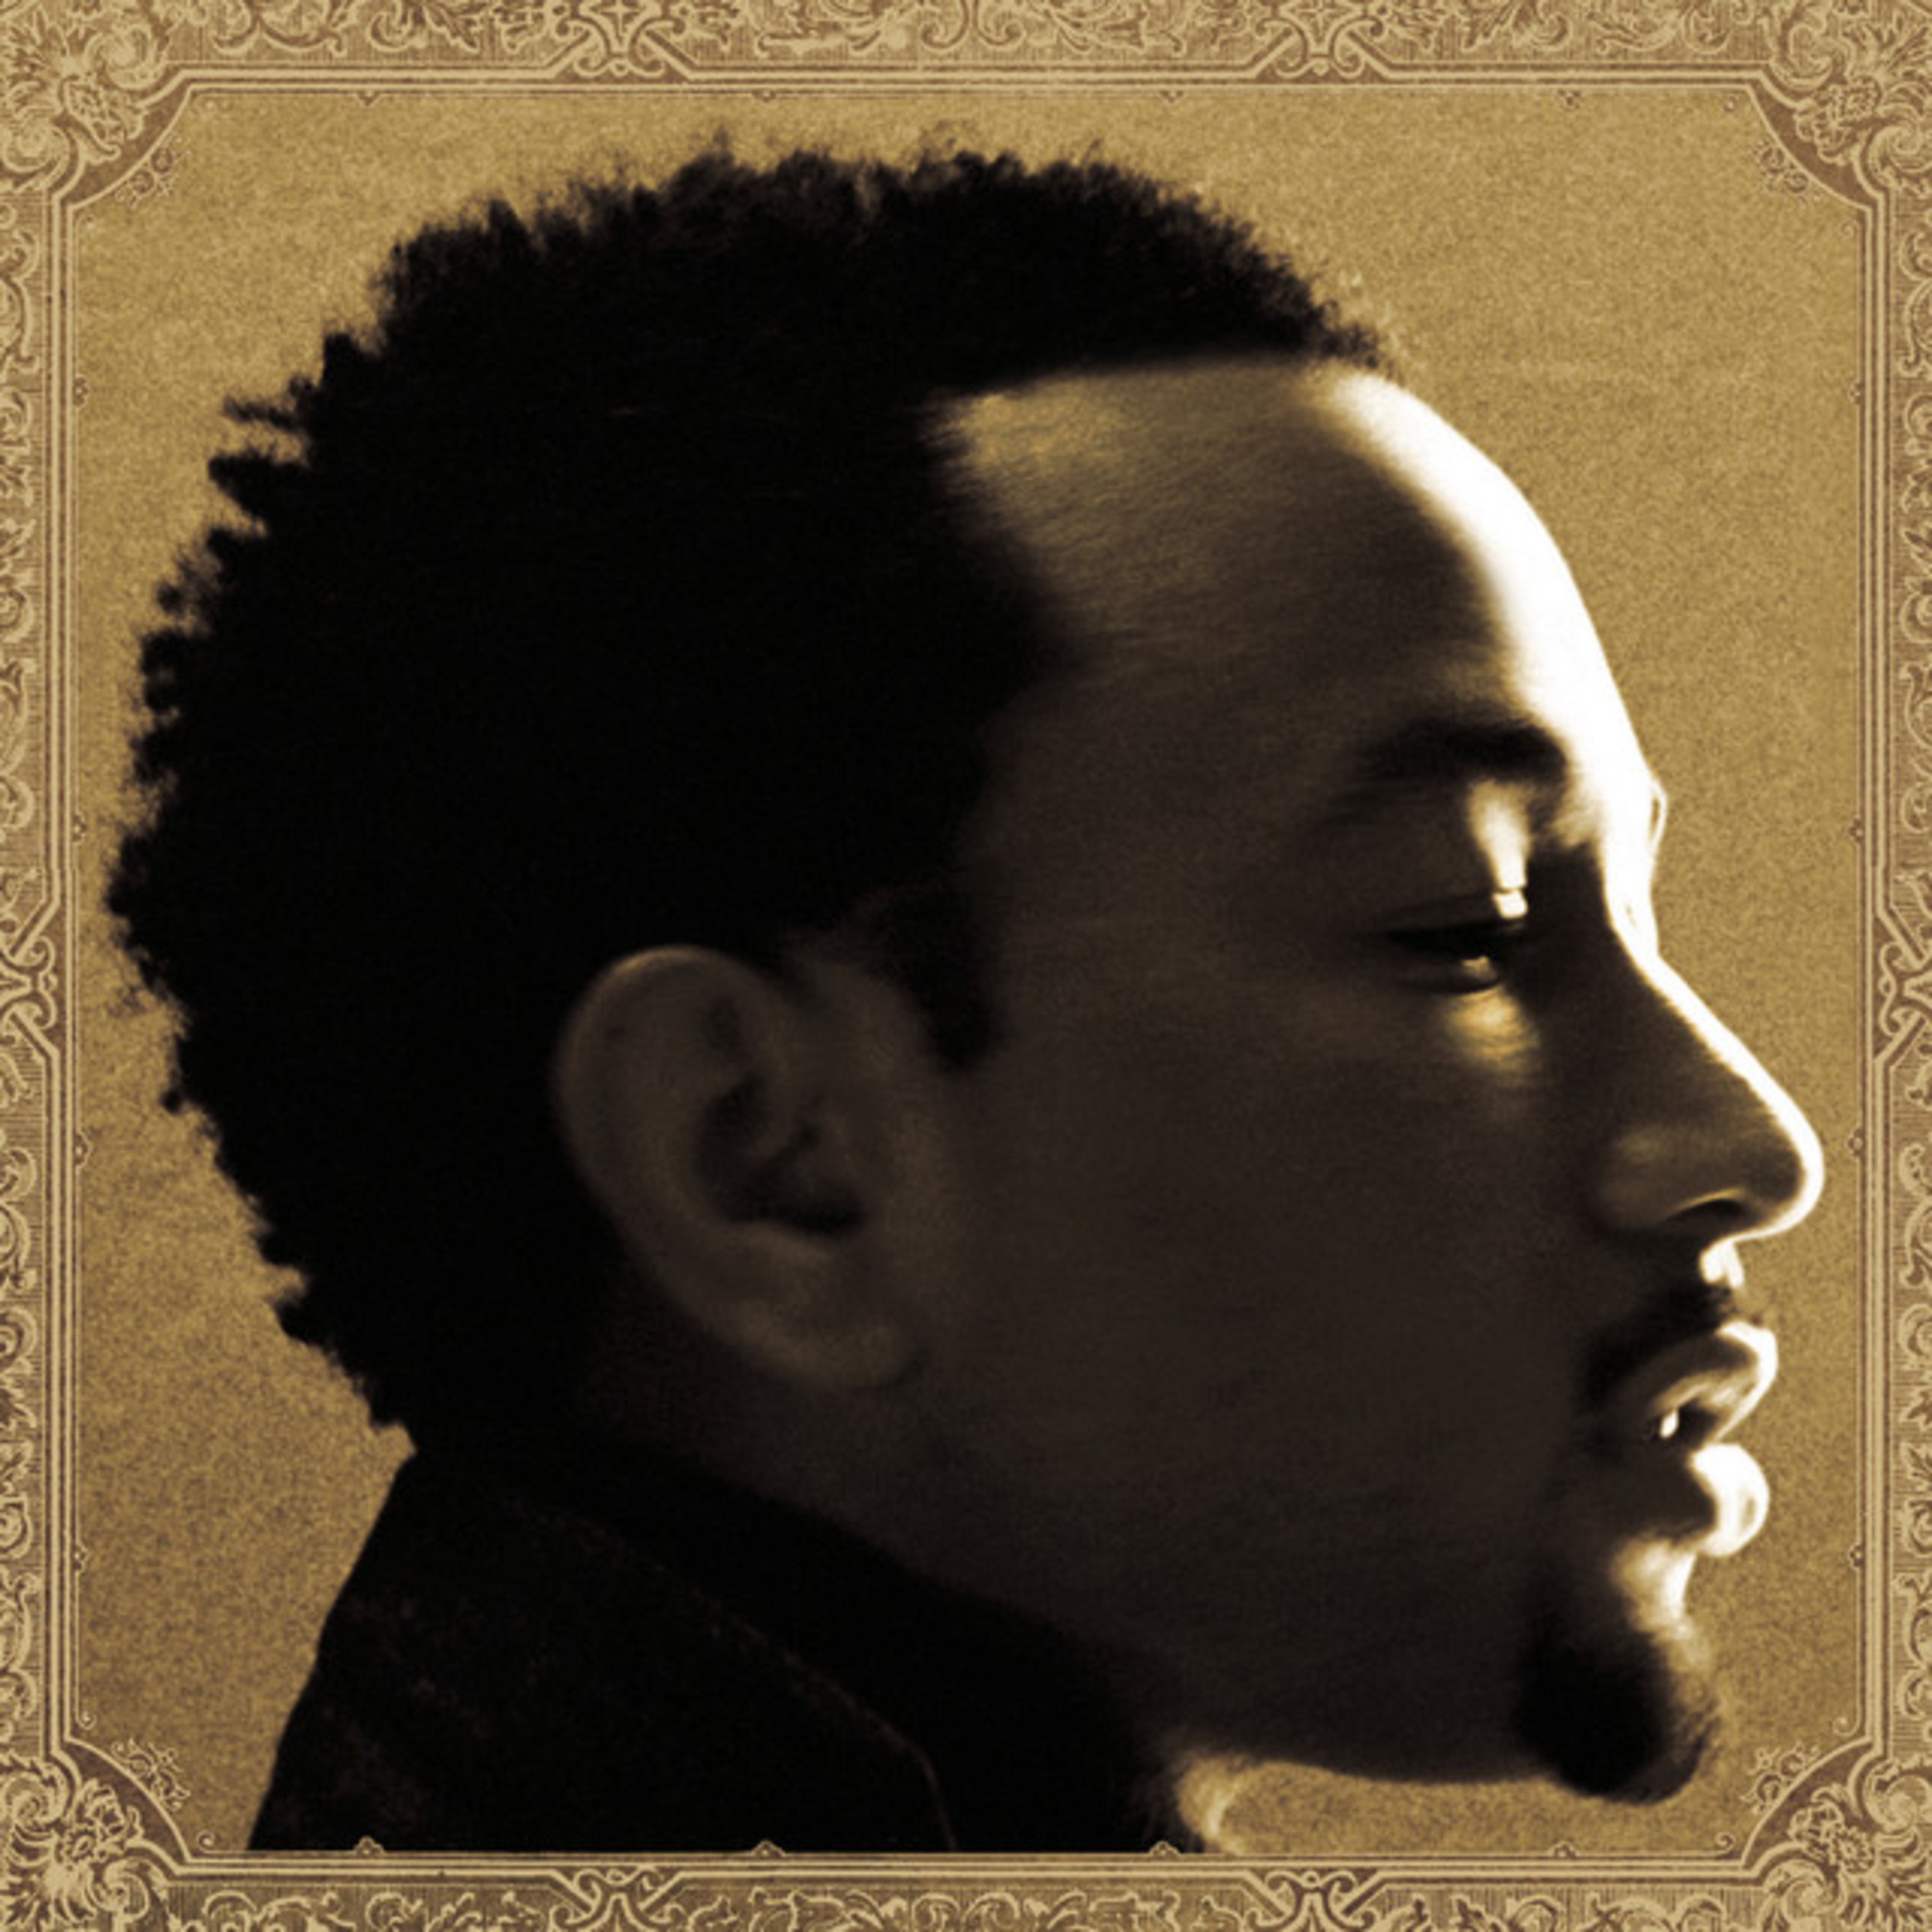 <p>Before John Legend signed to Kanye West's record label, he was known for singing hooks and playing the piano on other artists' songs. In 2004, Legend released his debut album, <em>Get Lifted,</em> which featured the hit singles "Used to Love U" and his Grammy Award-winning hit <a href="https://www.youtube.com/watch?v=PIh07c_P4hc">"Ordinary People."</a> </p><p>You may also like: <a href='https://www.yardbarker.com/entertainment/articles/the_20_most_heartbreaking_movie_deaths_031624/s1__39403958'>The 20 most heartbreaking movie deaths</a></p>